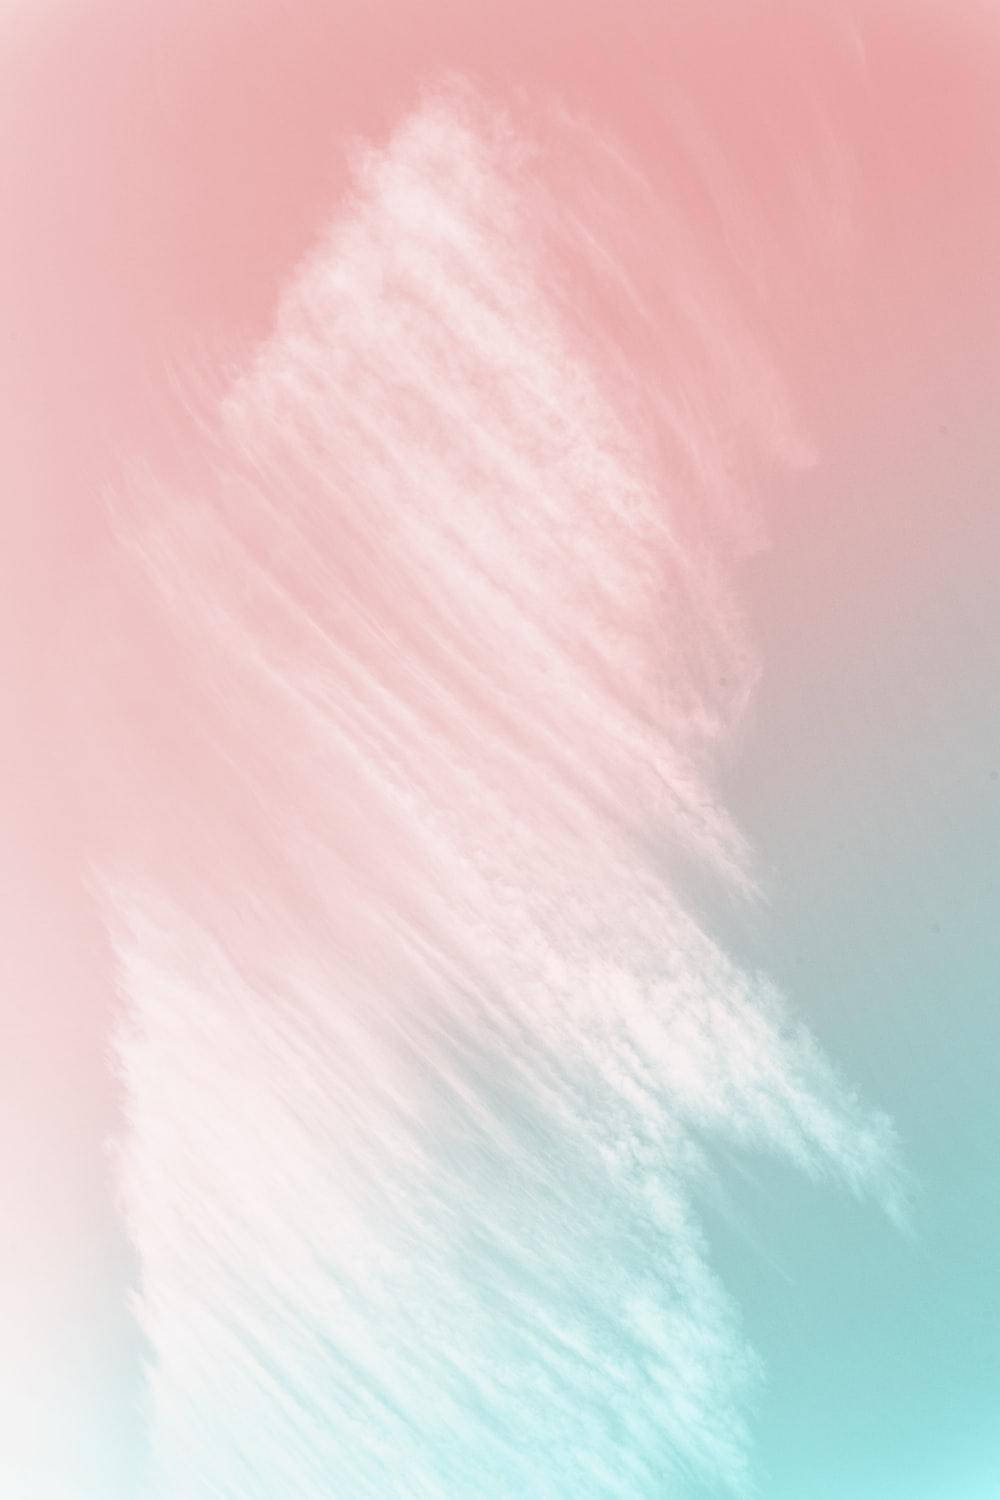 Aesthetic Peach Pink Cloudy Picture